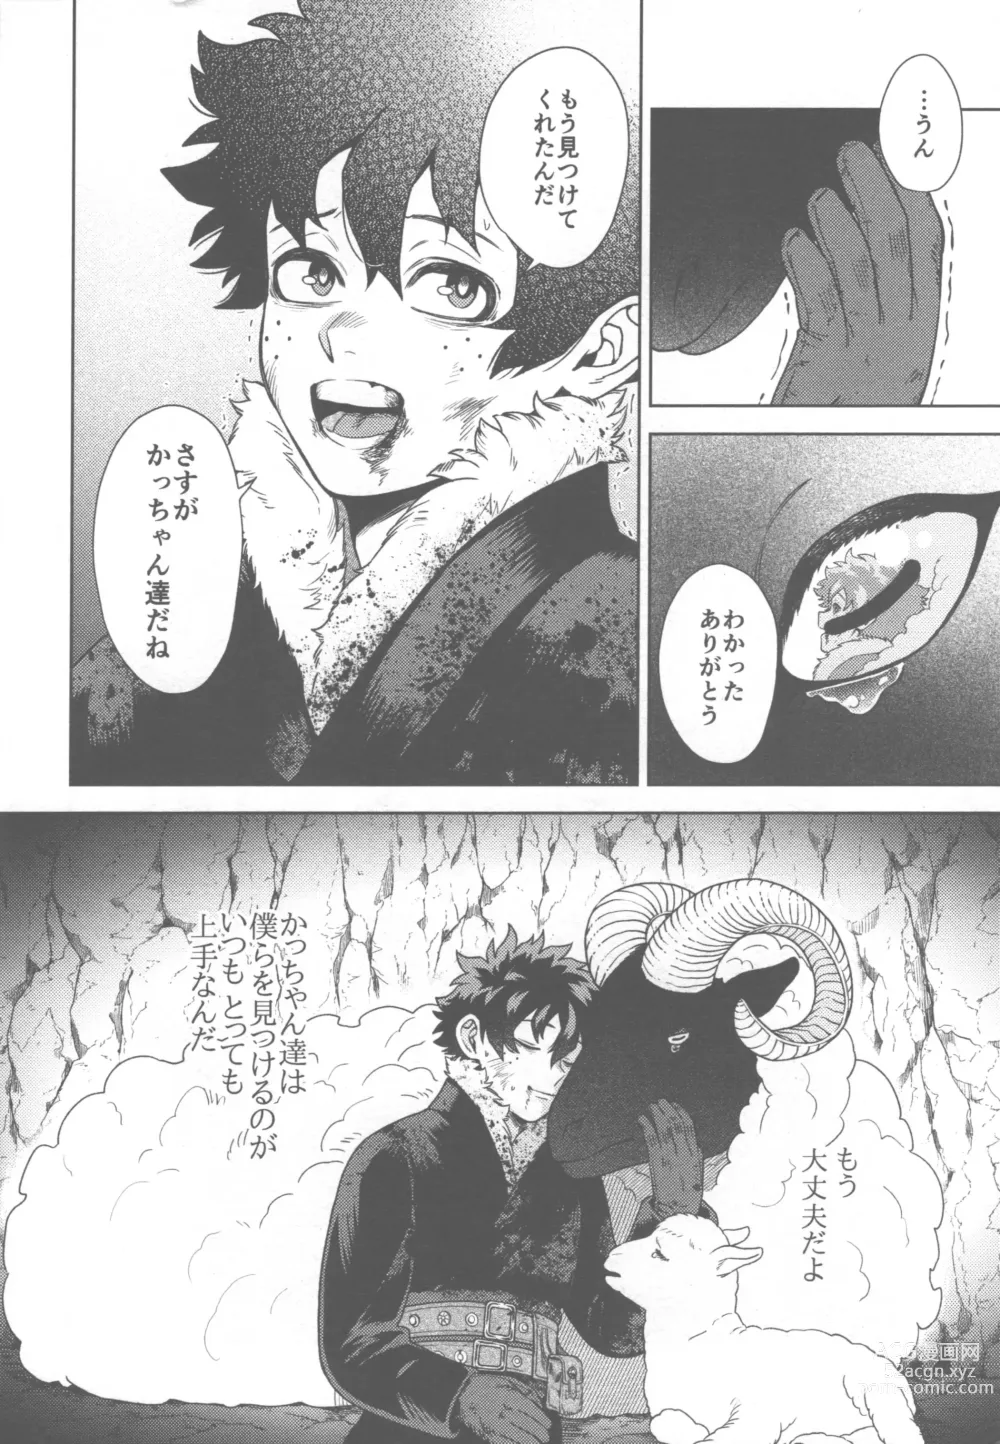 Page 10 of doujinshi SNOW TALE